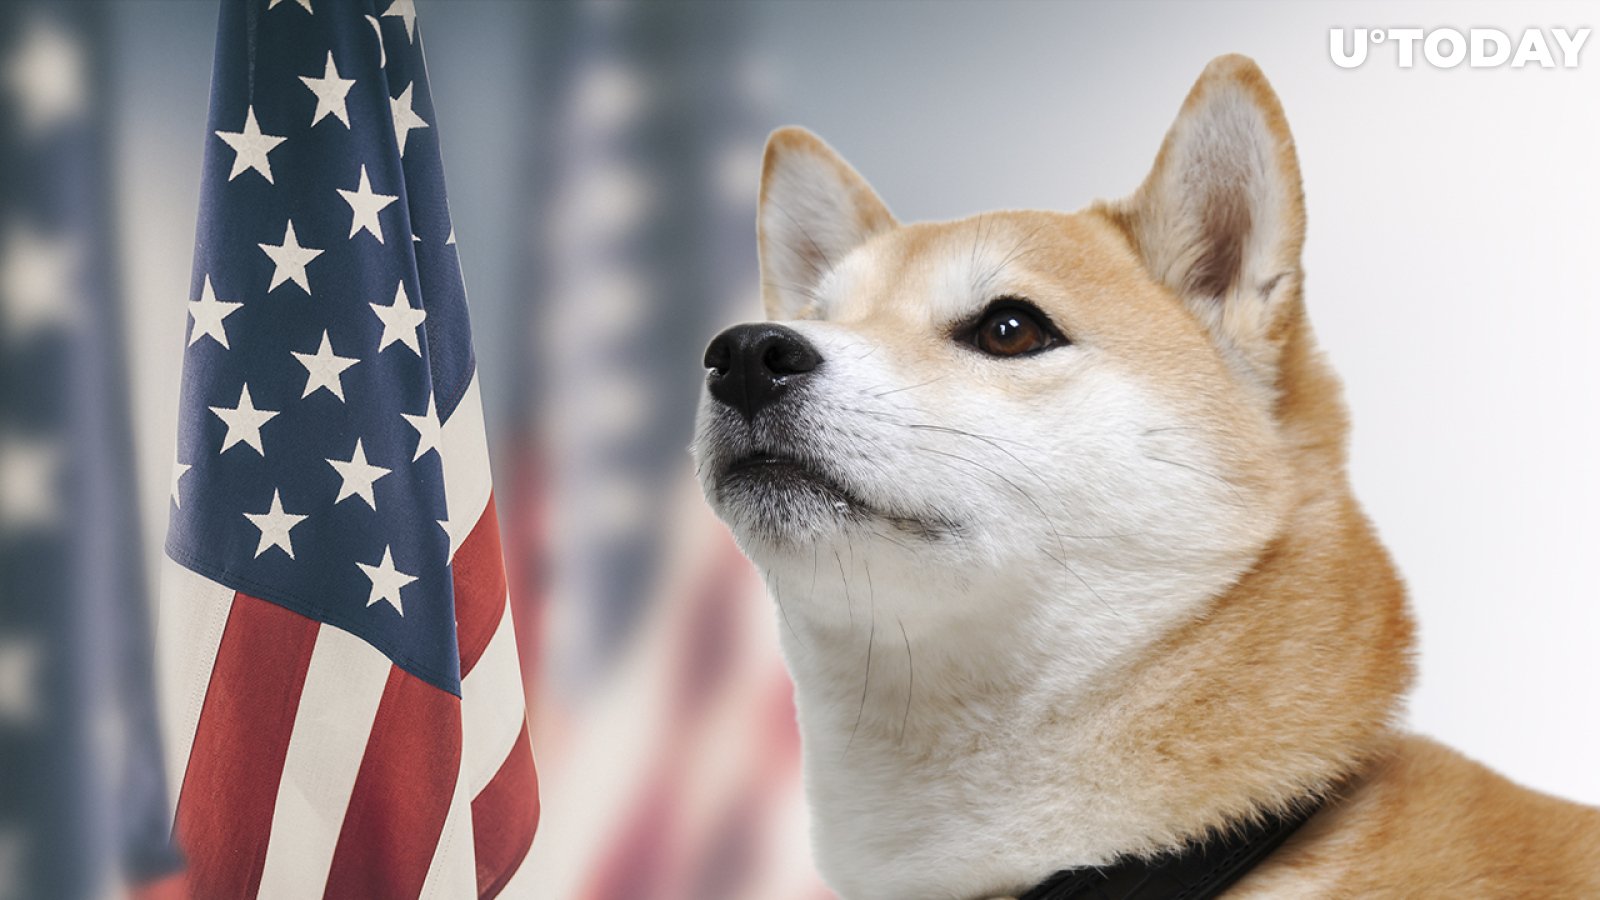 Dogecoin Creator and Elon Musk Team Up to Criticize US Government